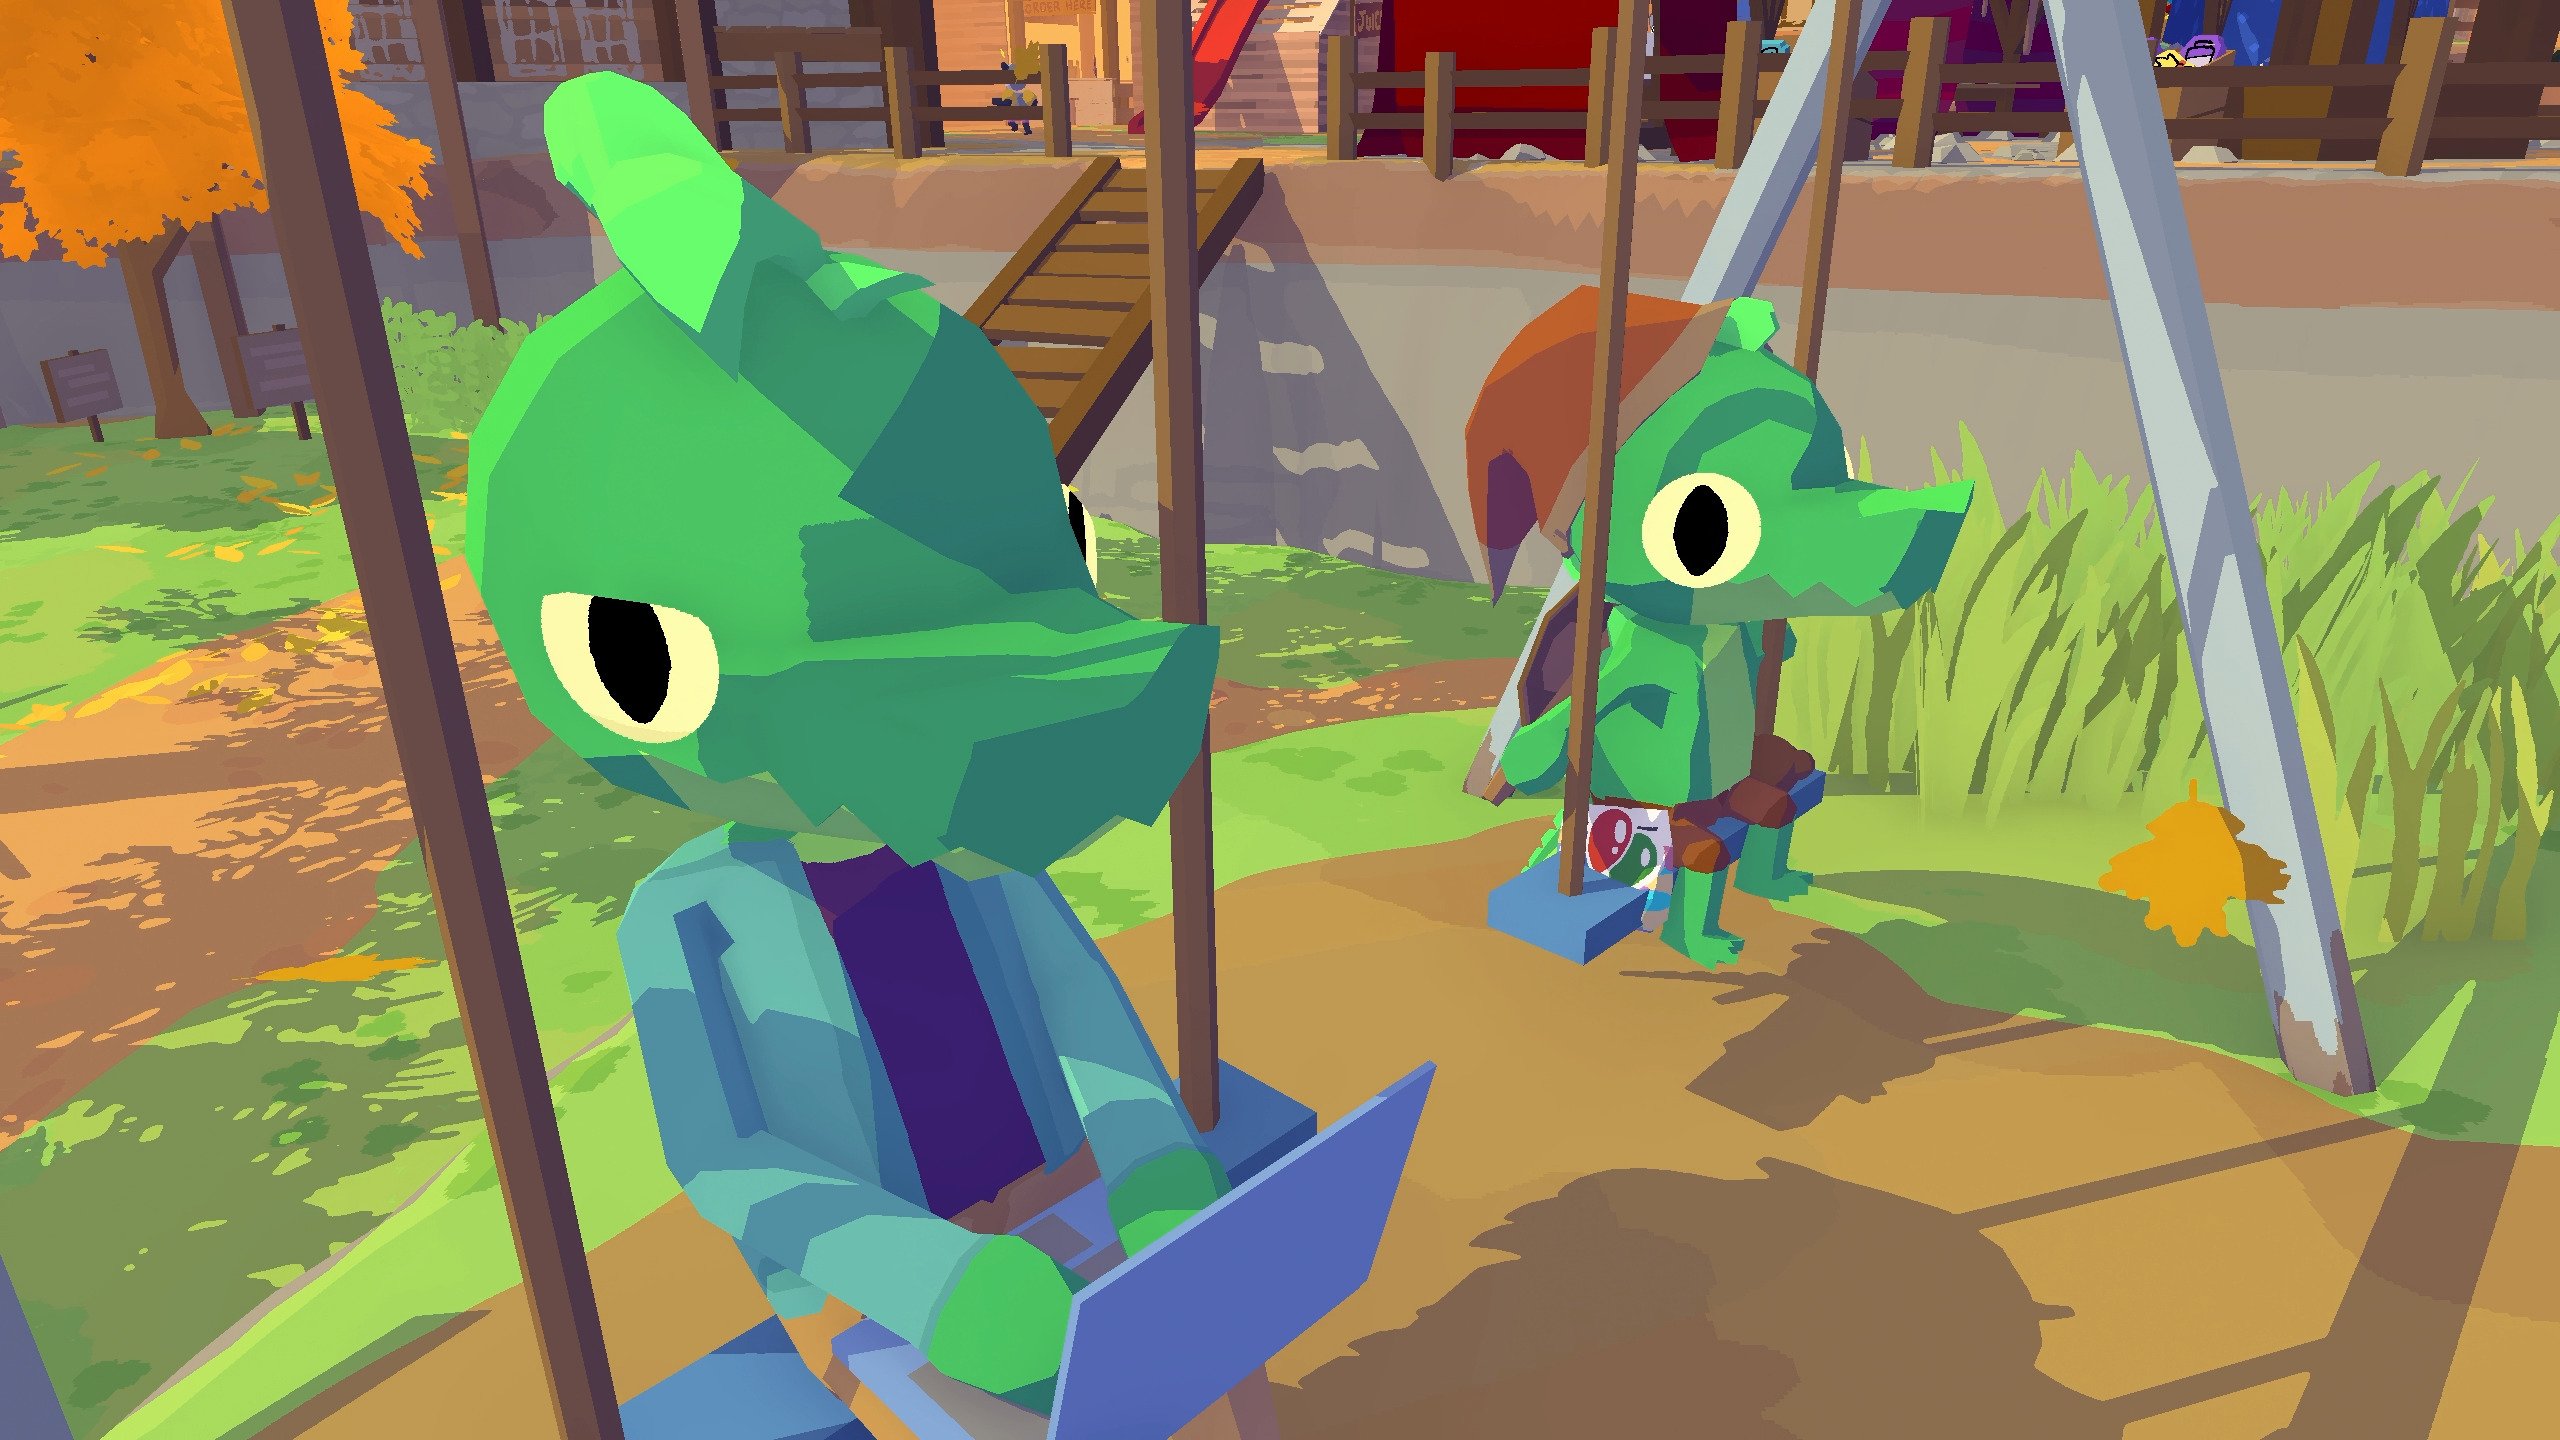 Review: Lil Gator Game is a wholesome